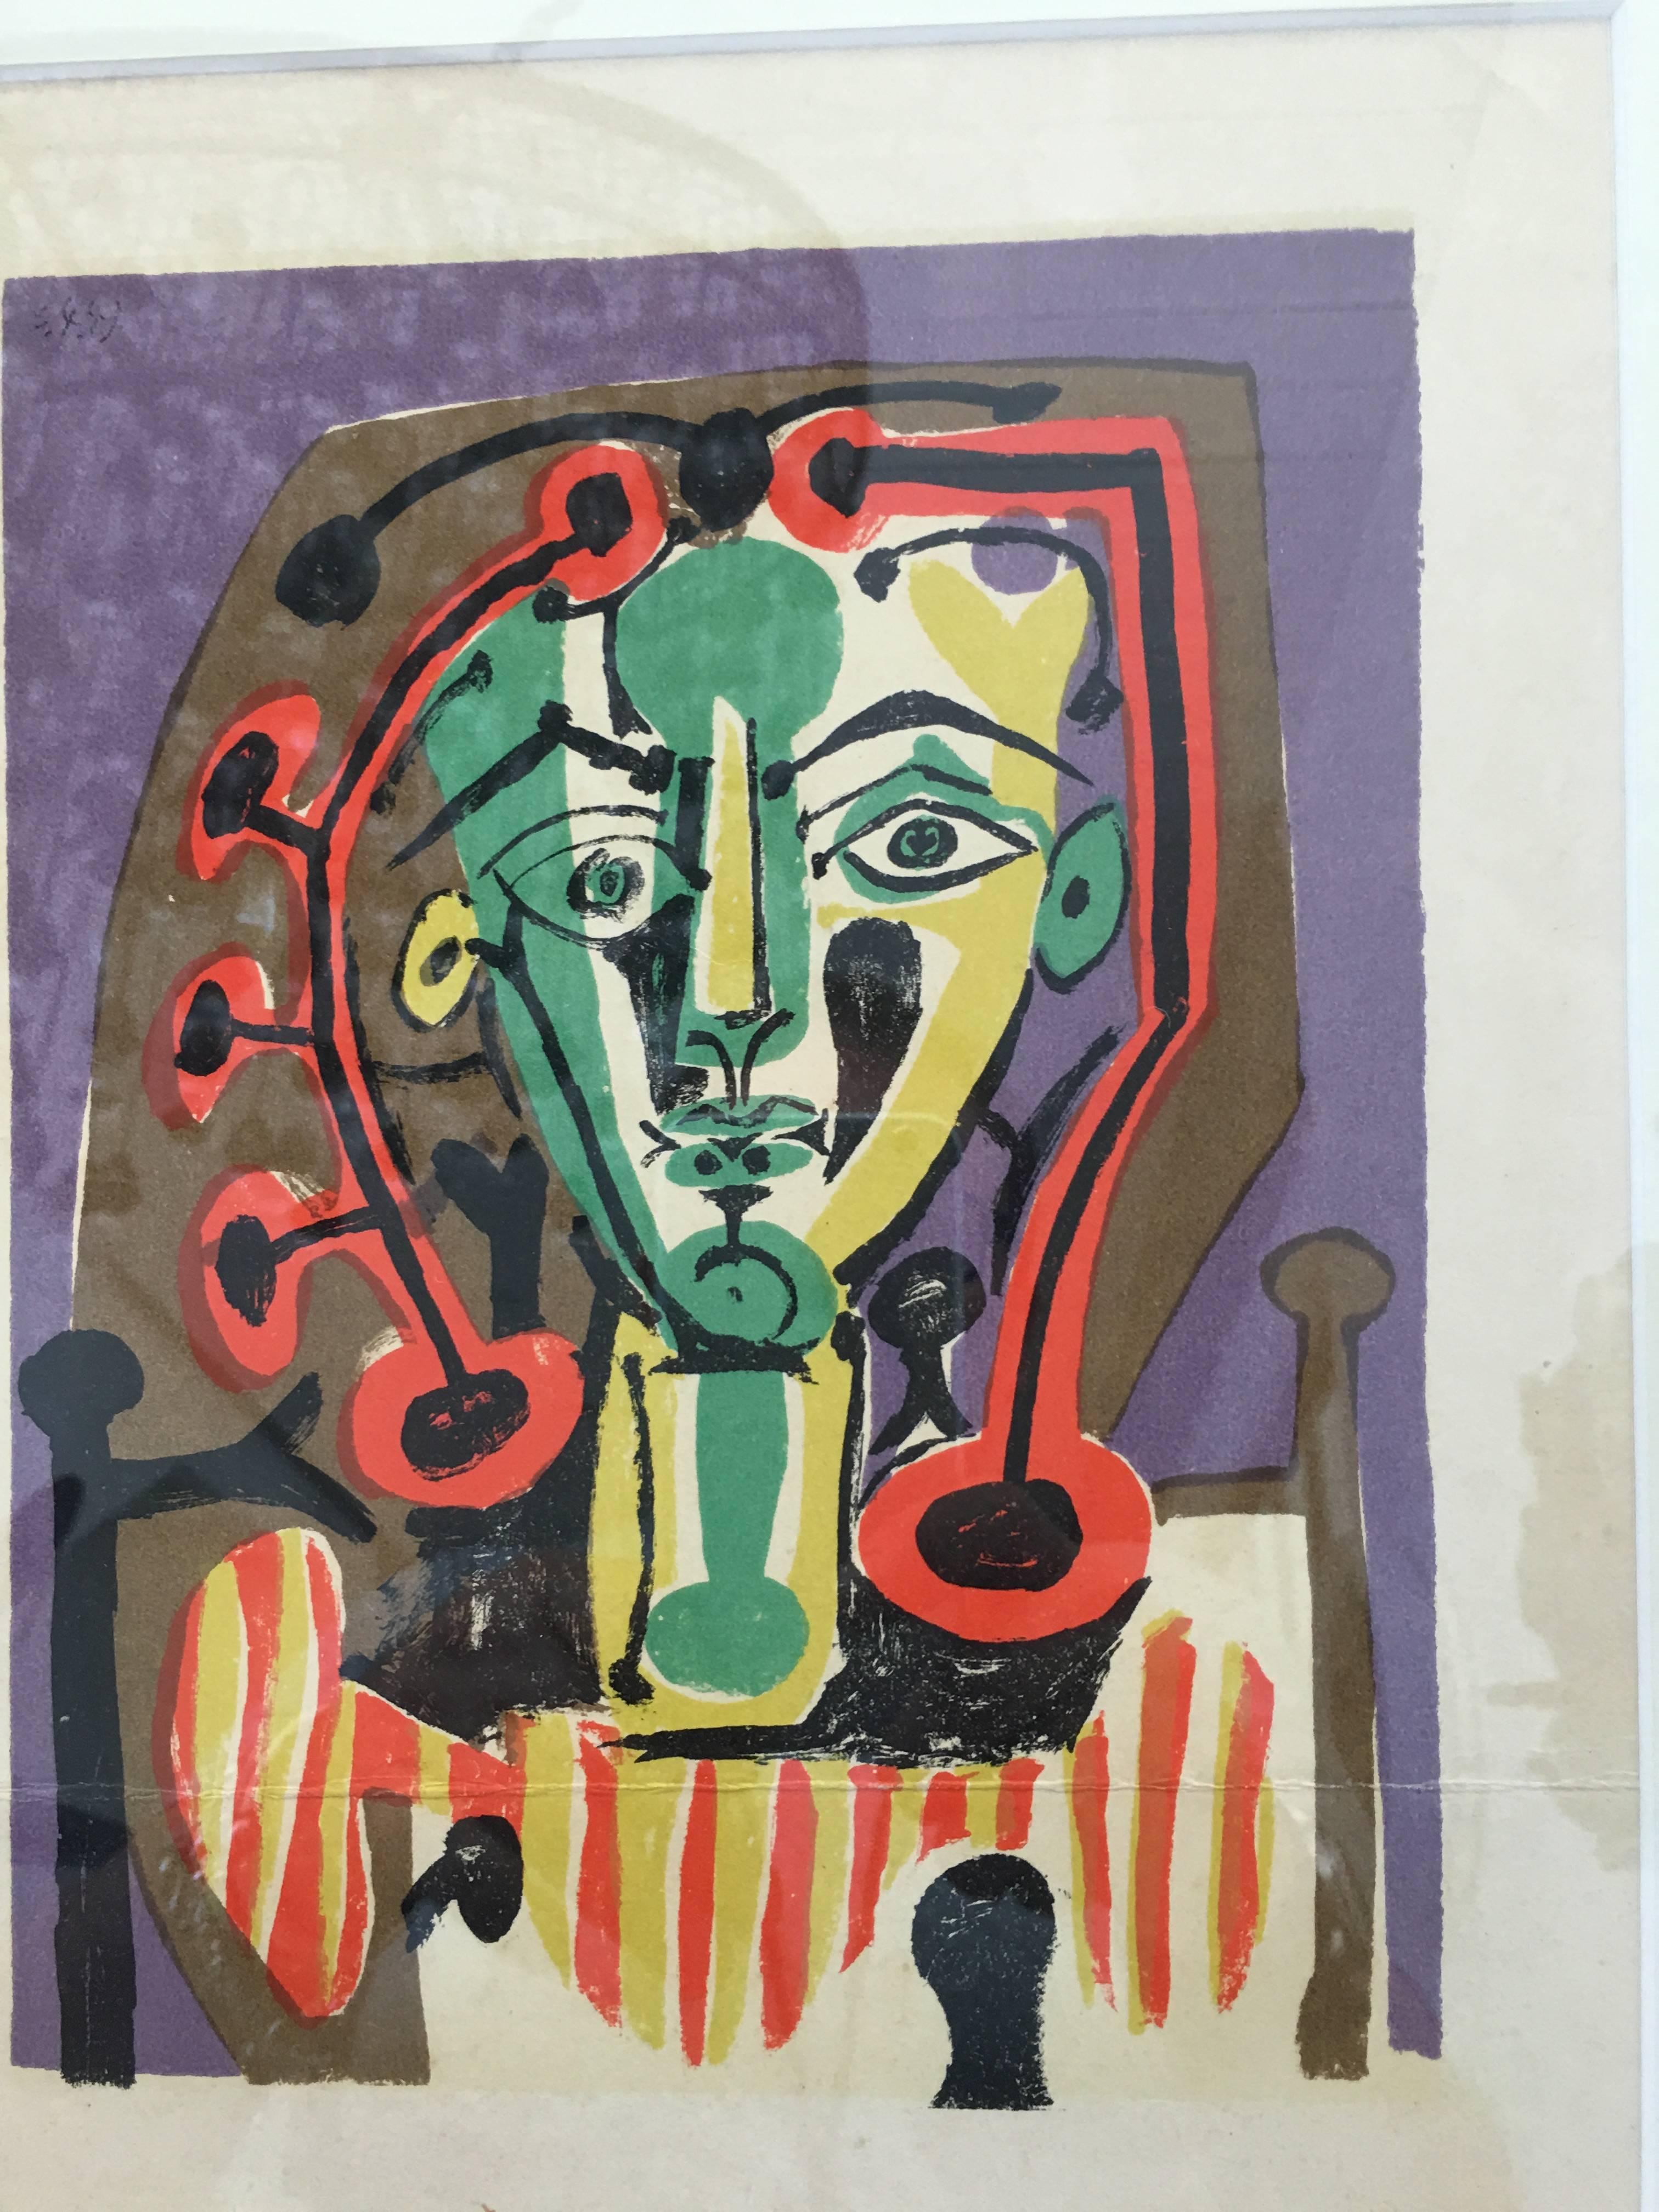 After Pablo Picasso, Plate VII, from Suite de 180 Dessins de Picasso portfolio, 1954. Beautiful original lithograph in color on wove paper after the artwork by Pablo Picasso, framed.